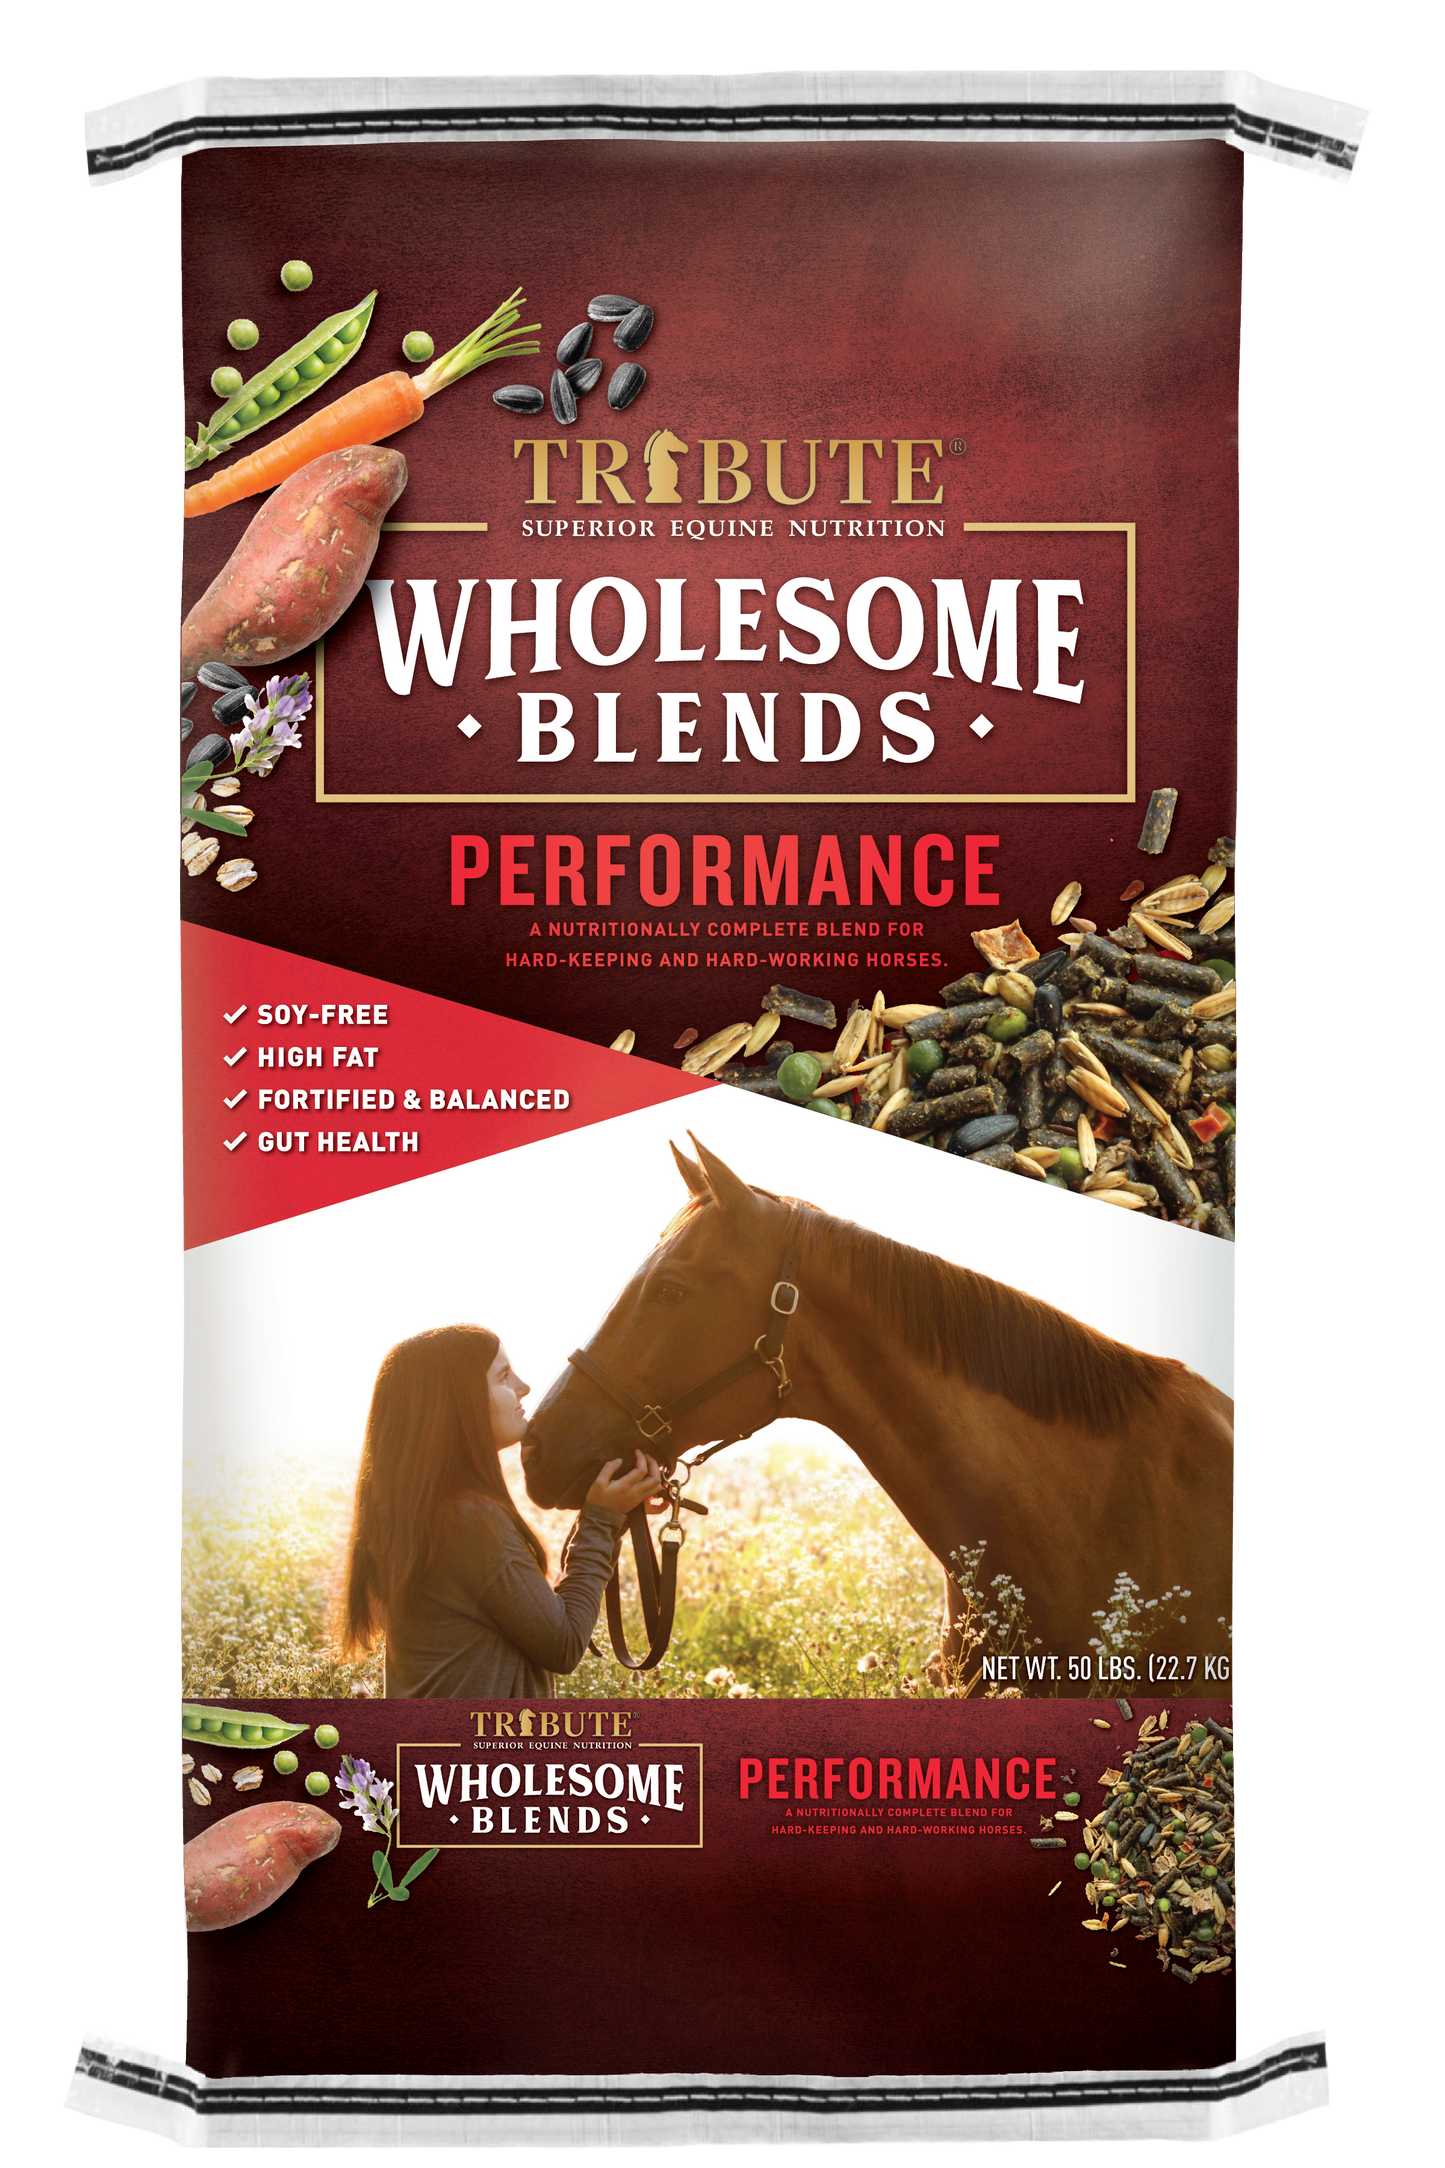 Wholesome Blends® Performance, Soy-Free, Textured, High Fat Feed